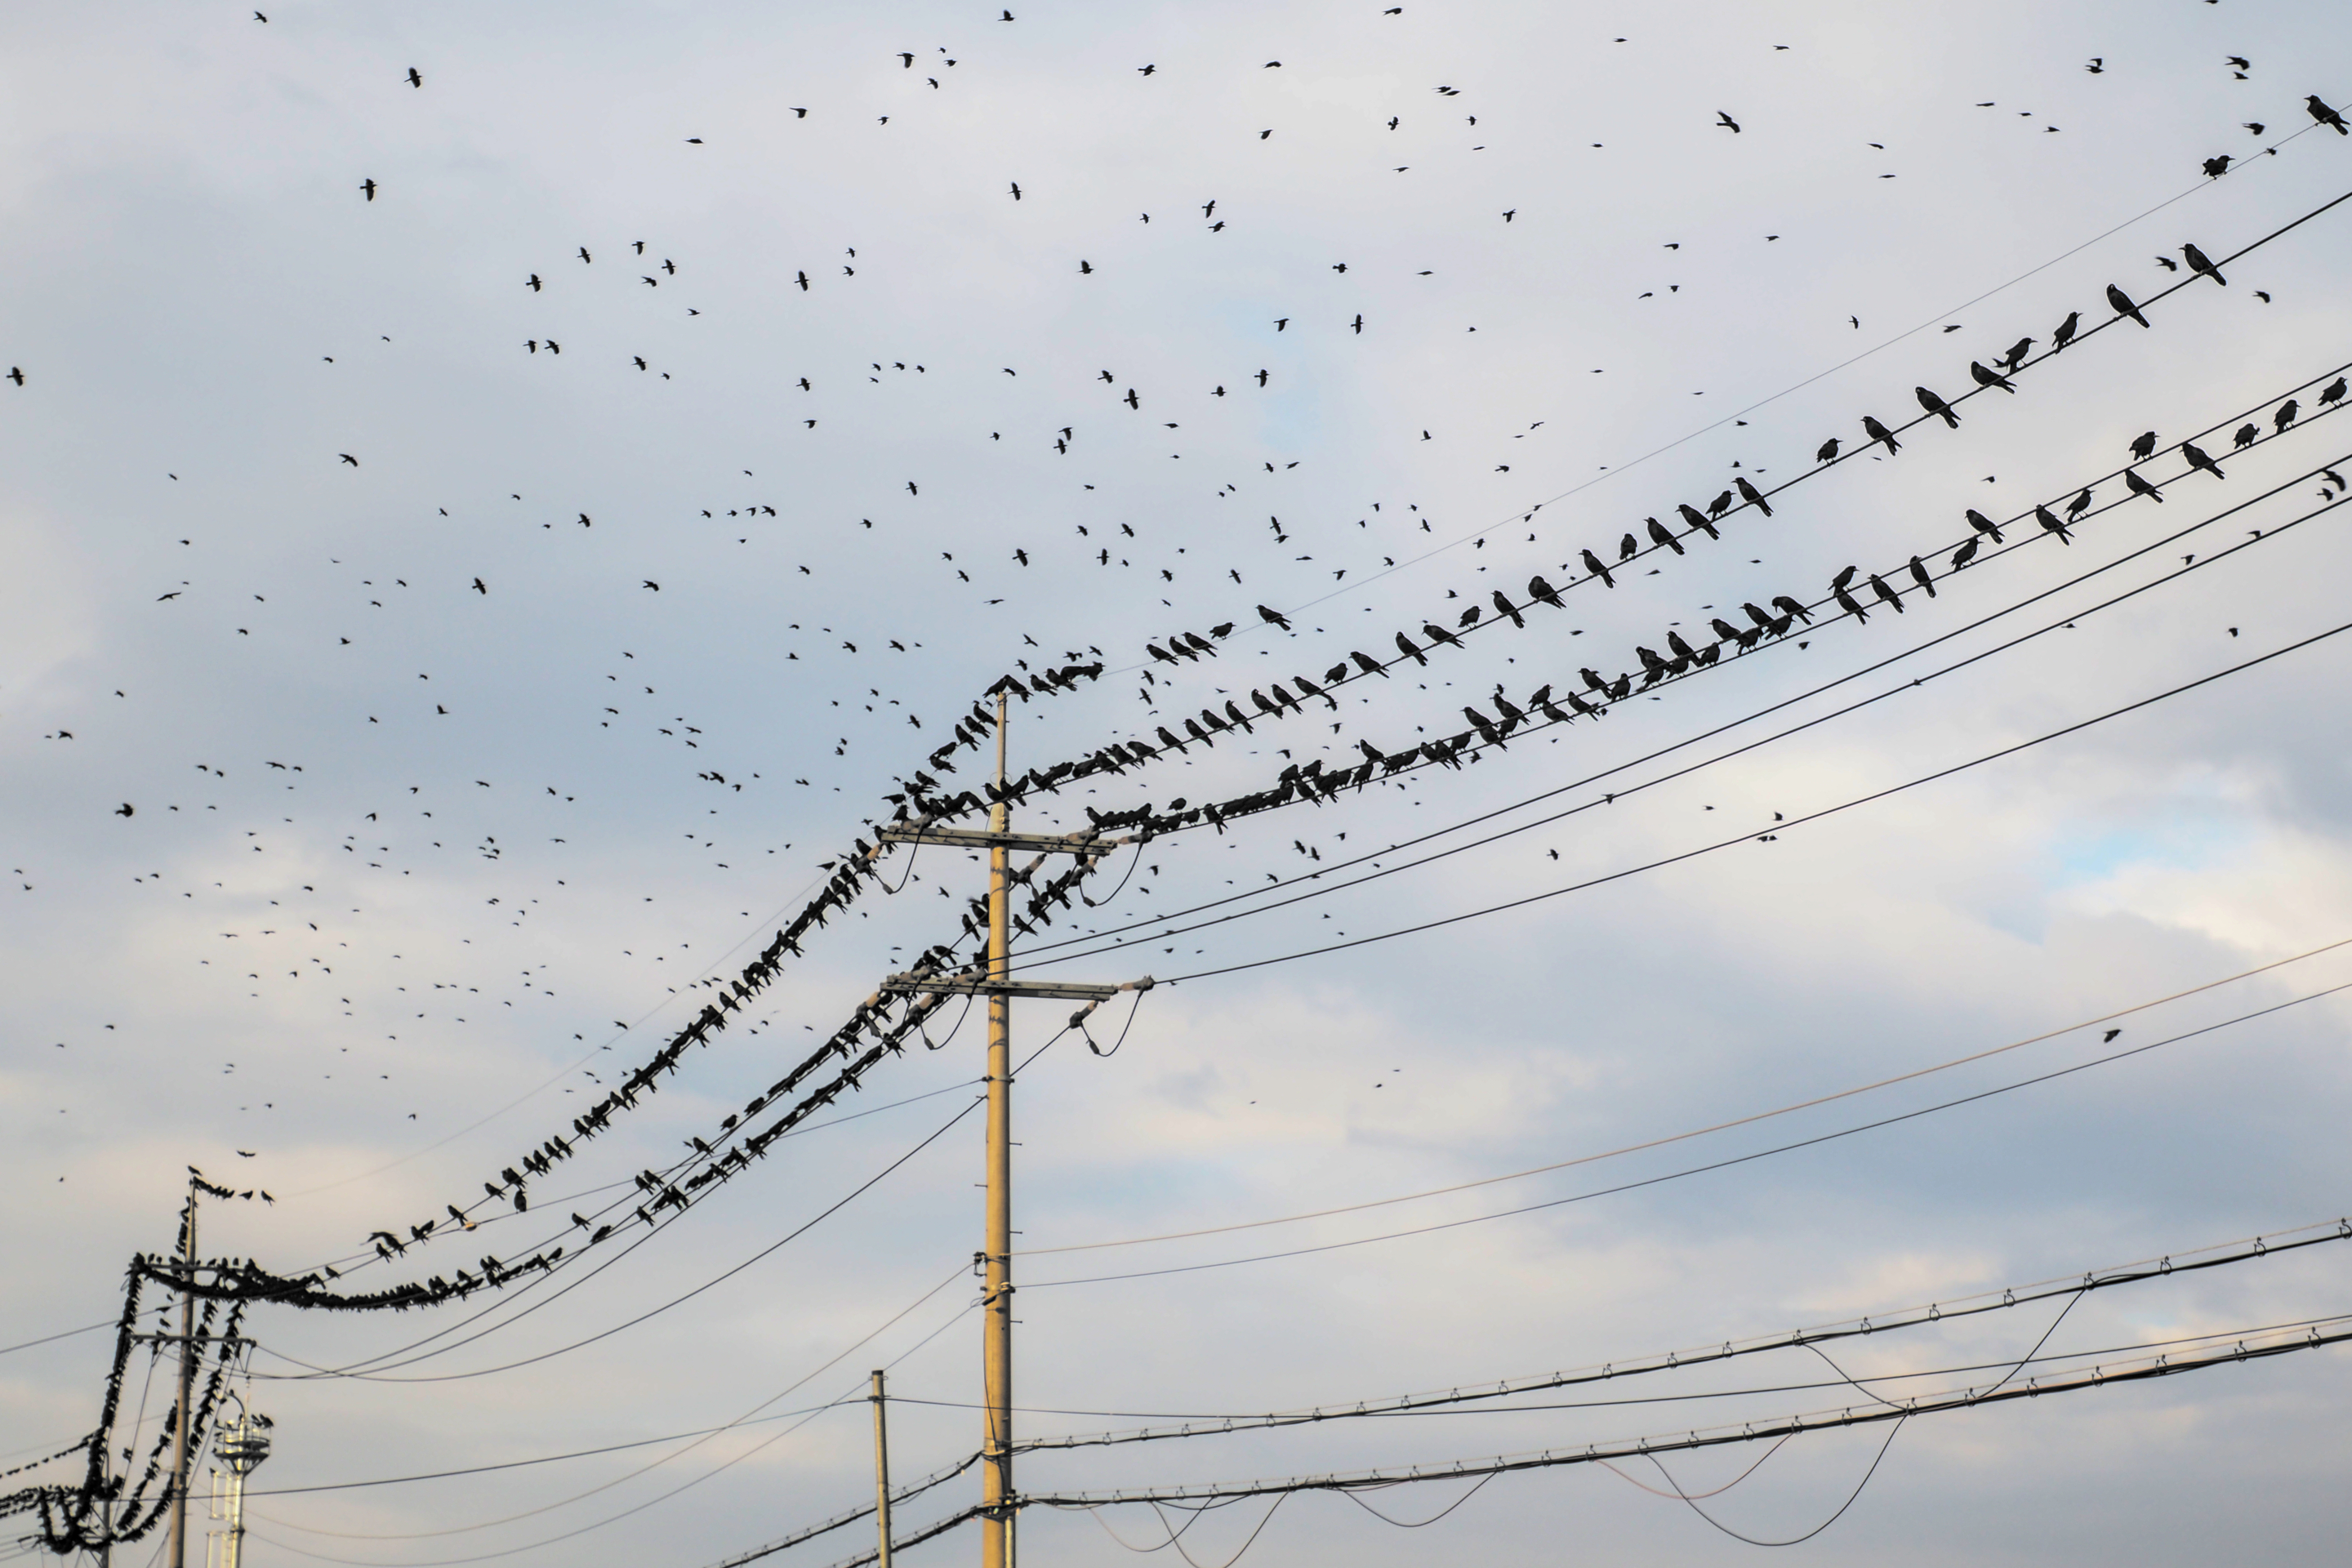 more birds sitting on power lines, some more flying